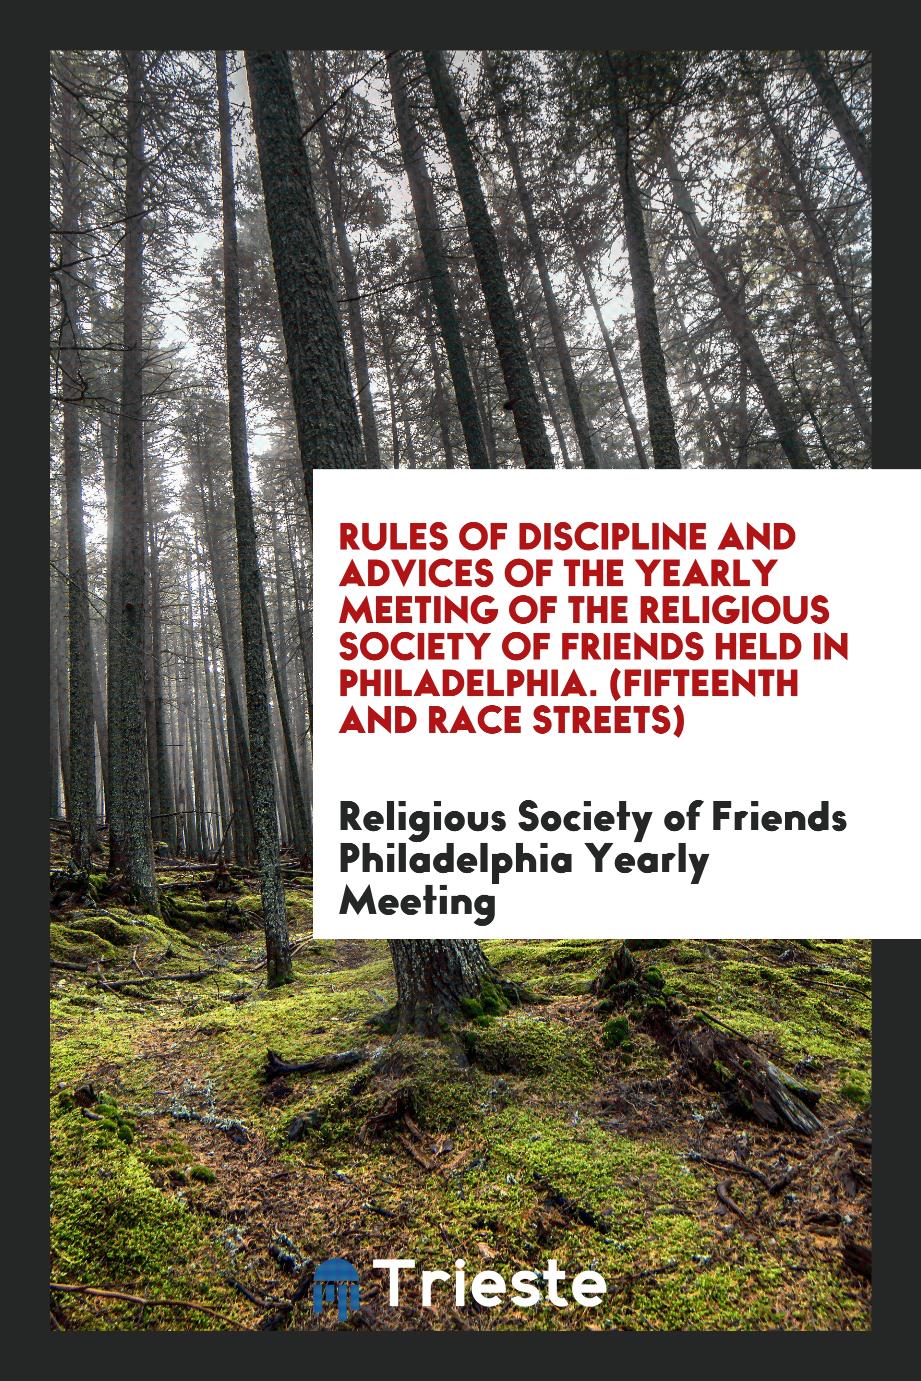 Rules of Discipline and Advices of the Yearly Meeting of the Religious Society of Friends Held in Philadelphia. (Fifteenth and Race Streets)